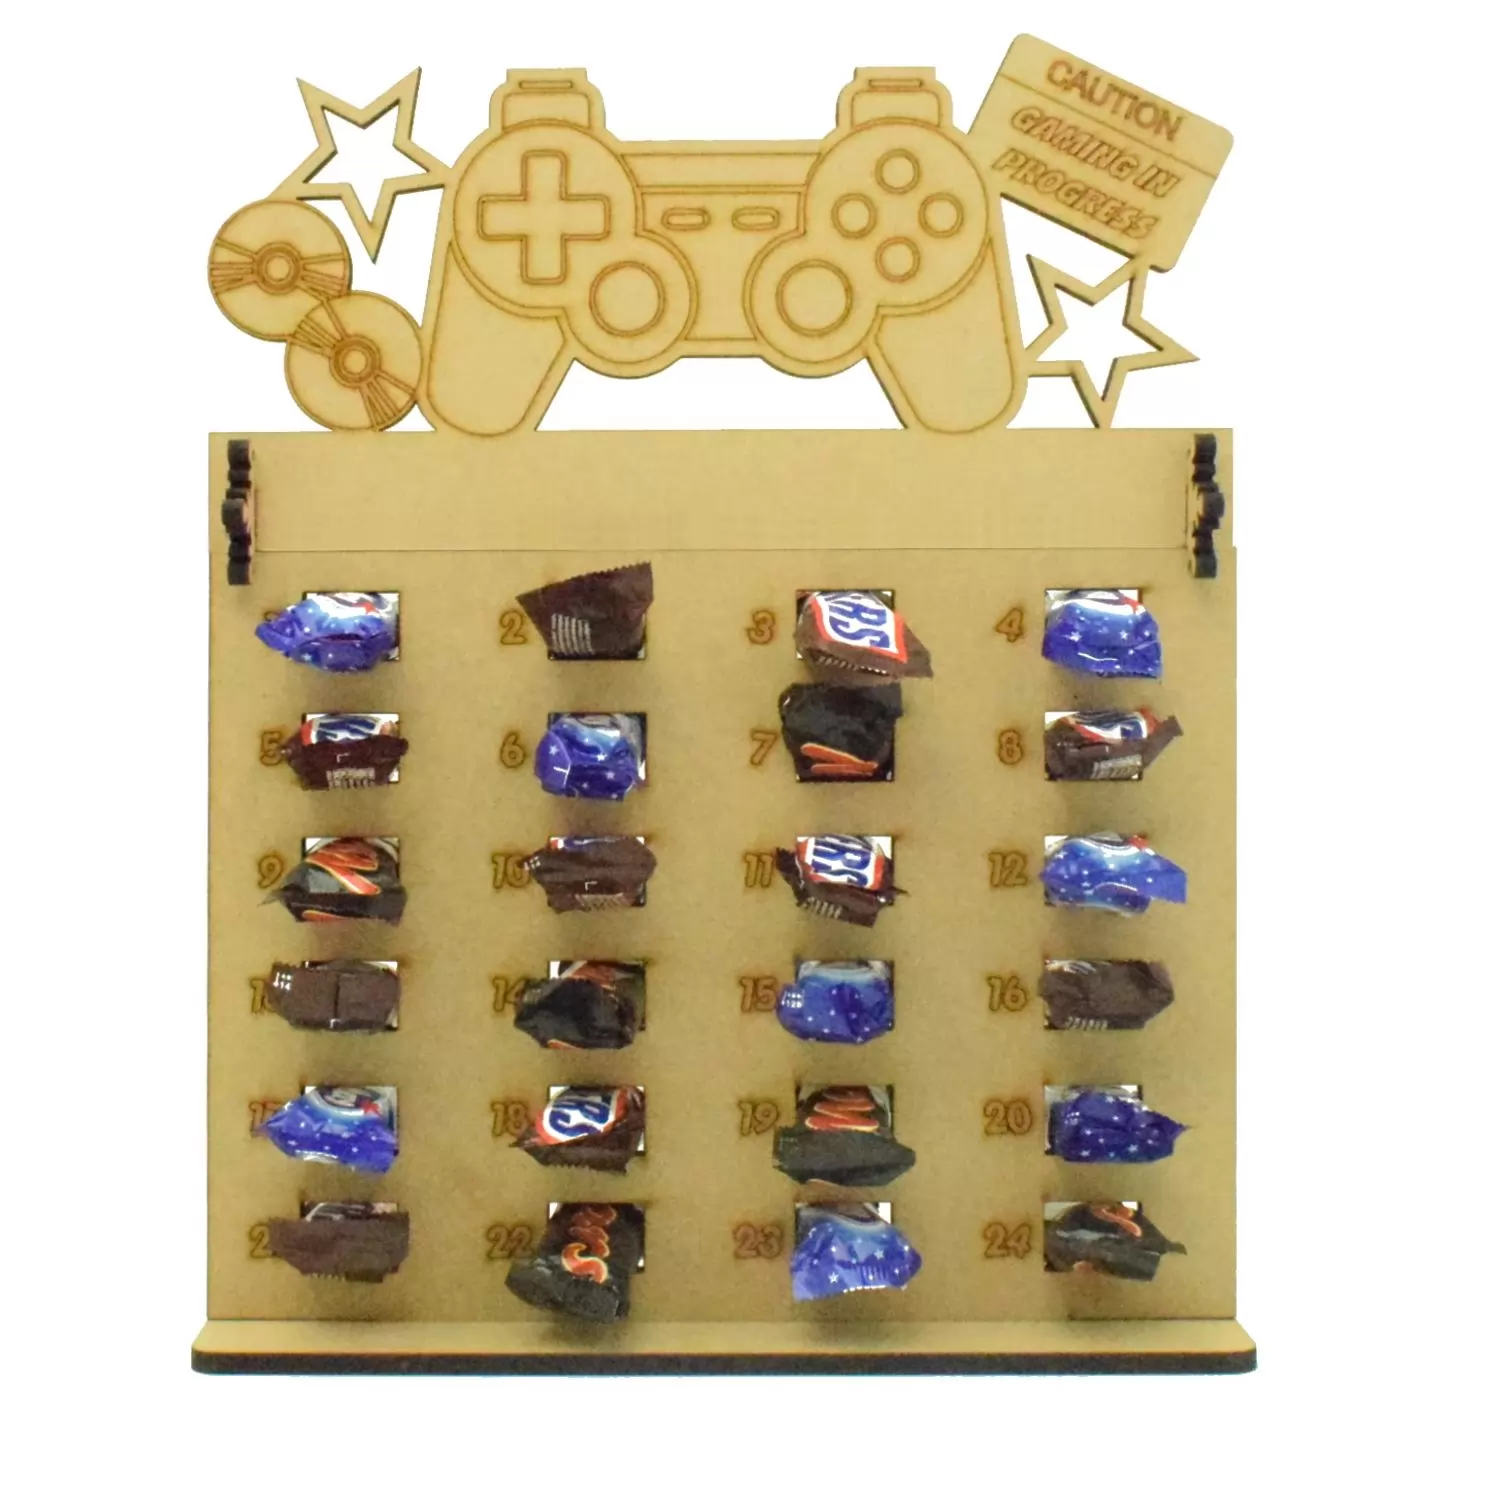 The leading supplier of Christmas Advent Calendars